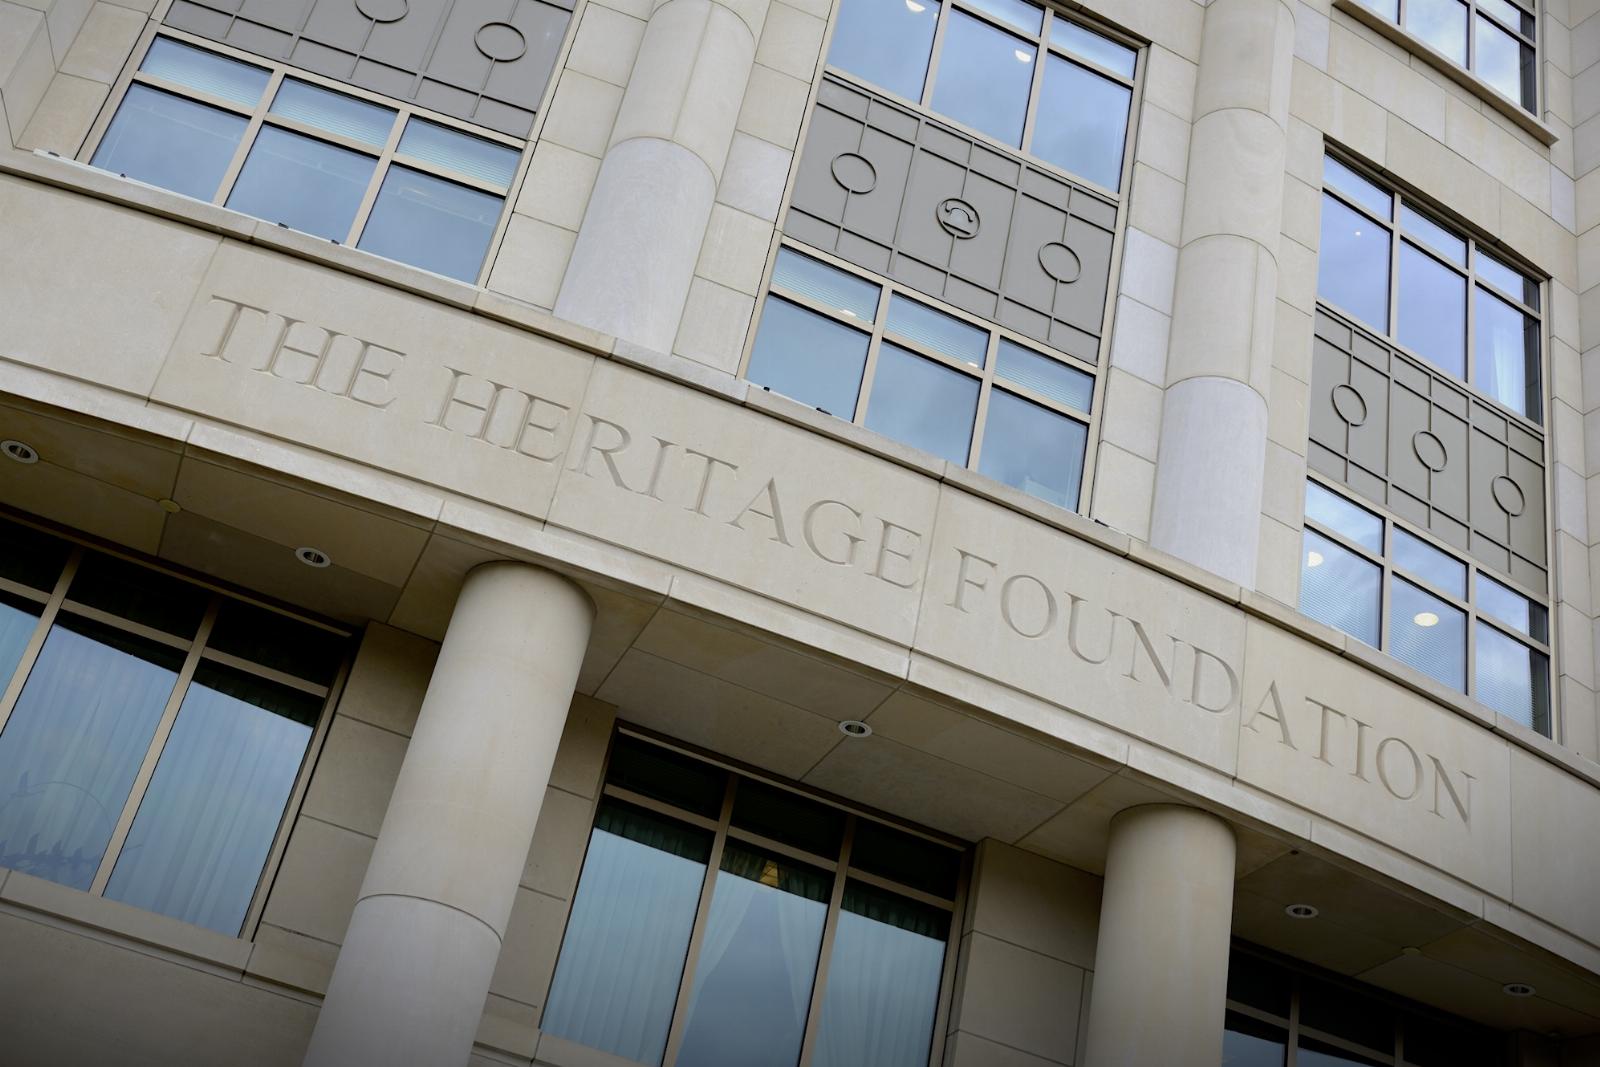 US think tank Heritage Foundation hit by cyberattack